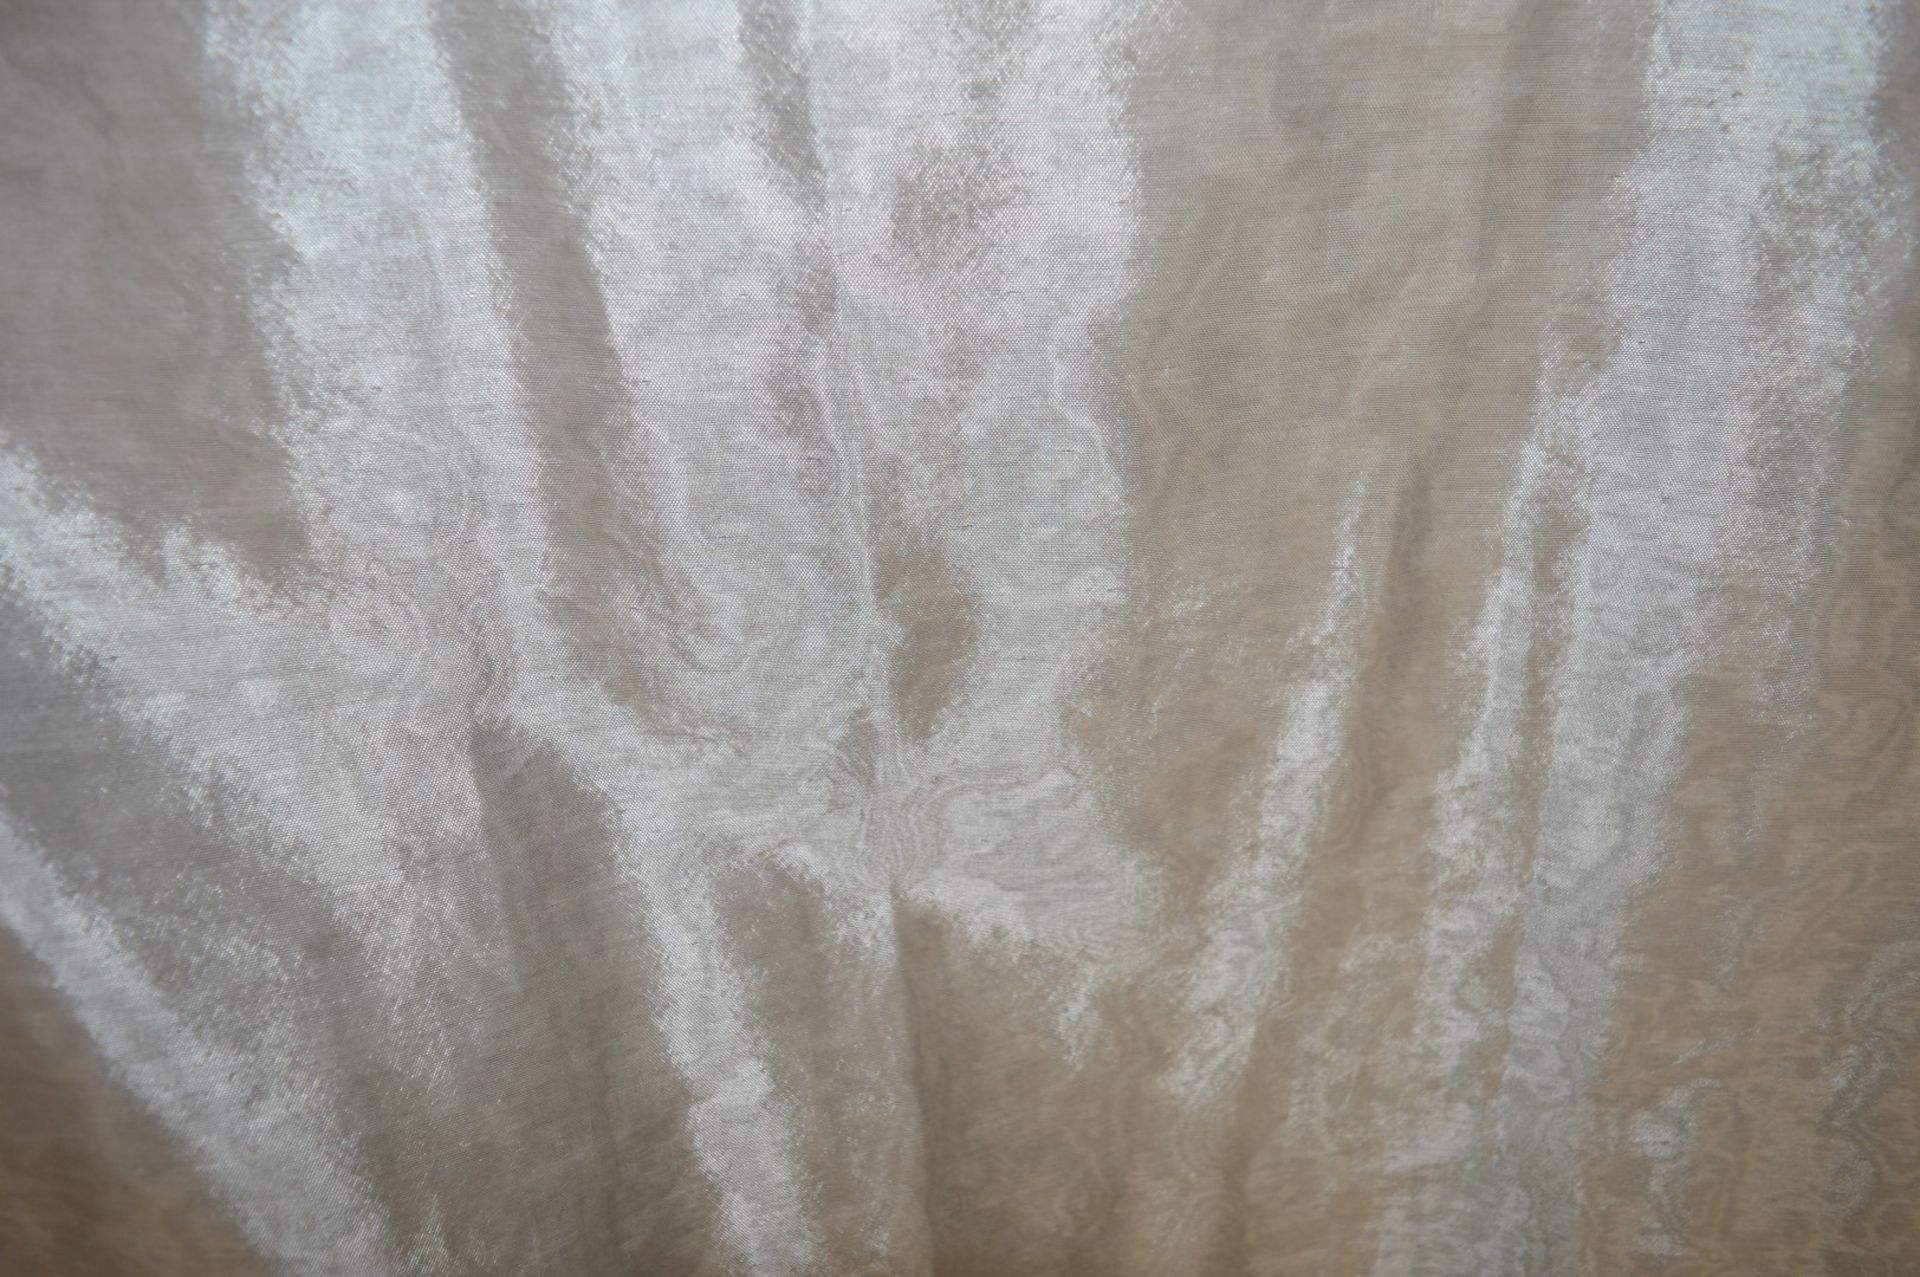 1 x Set of Curtains With Electric Motor - Ref 73 - Approx Length 800cm x Drop 307 cms - CL230 - - Image 4 of 7